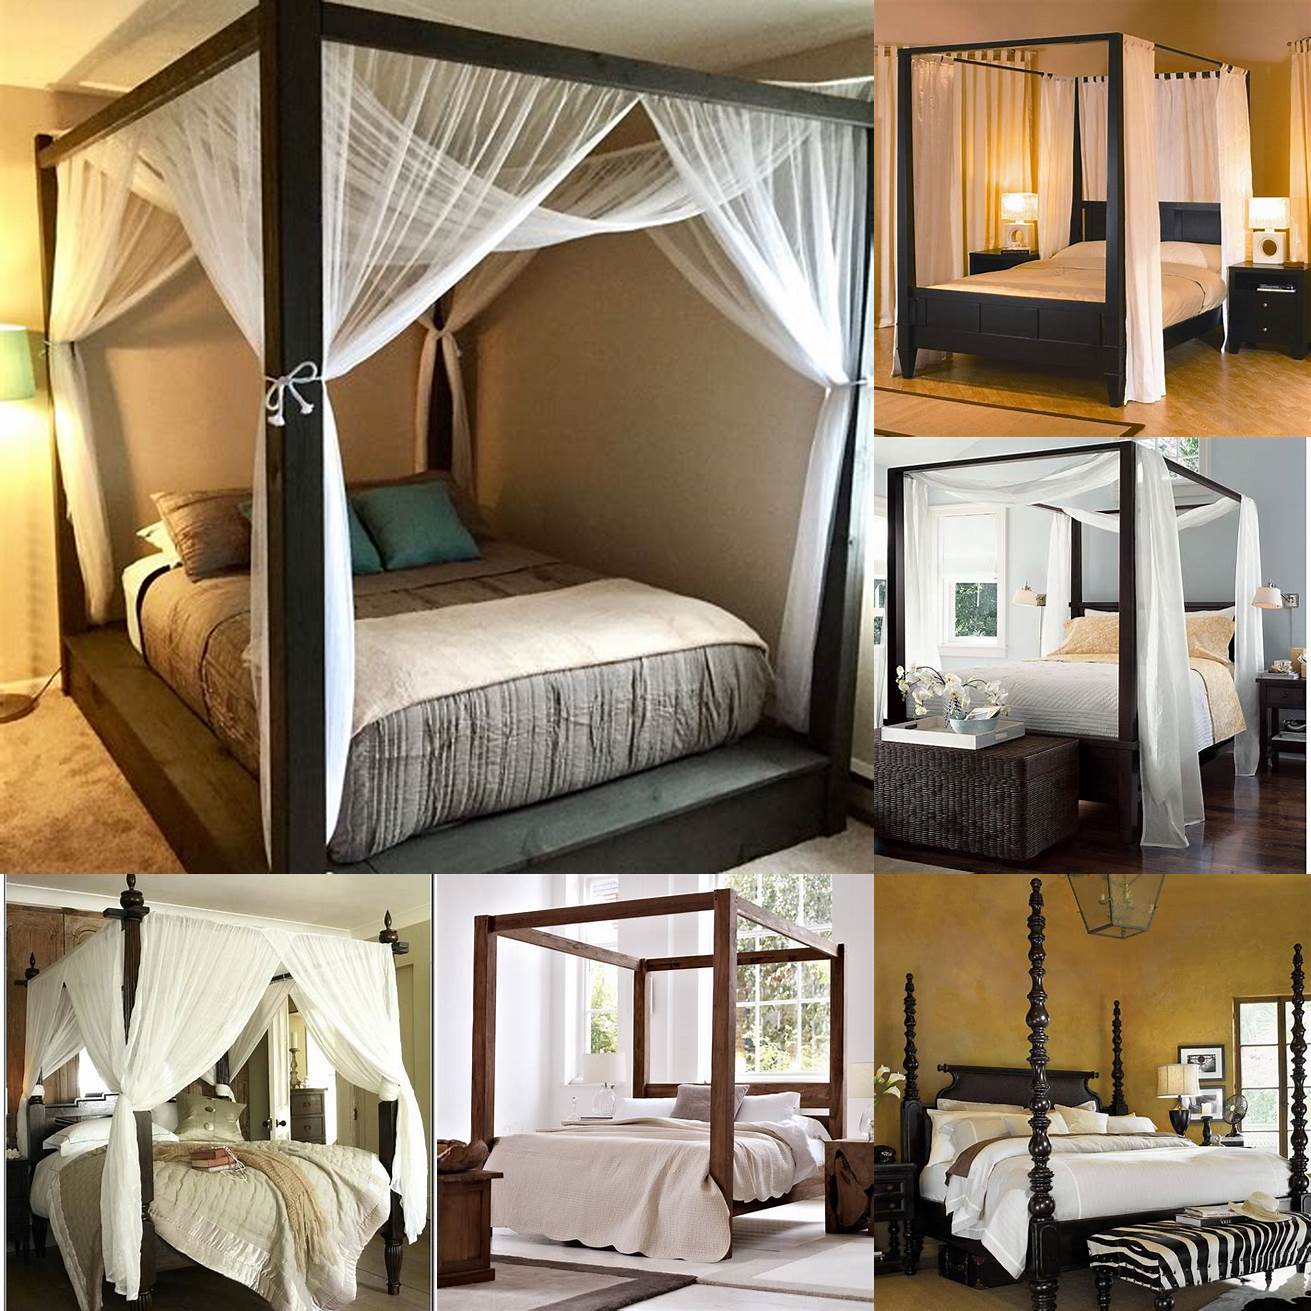 A canopy bed has a frame with four posts and a canopy top creating a cozy and private sleeping area